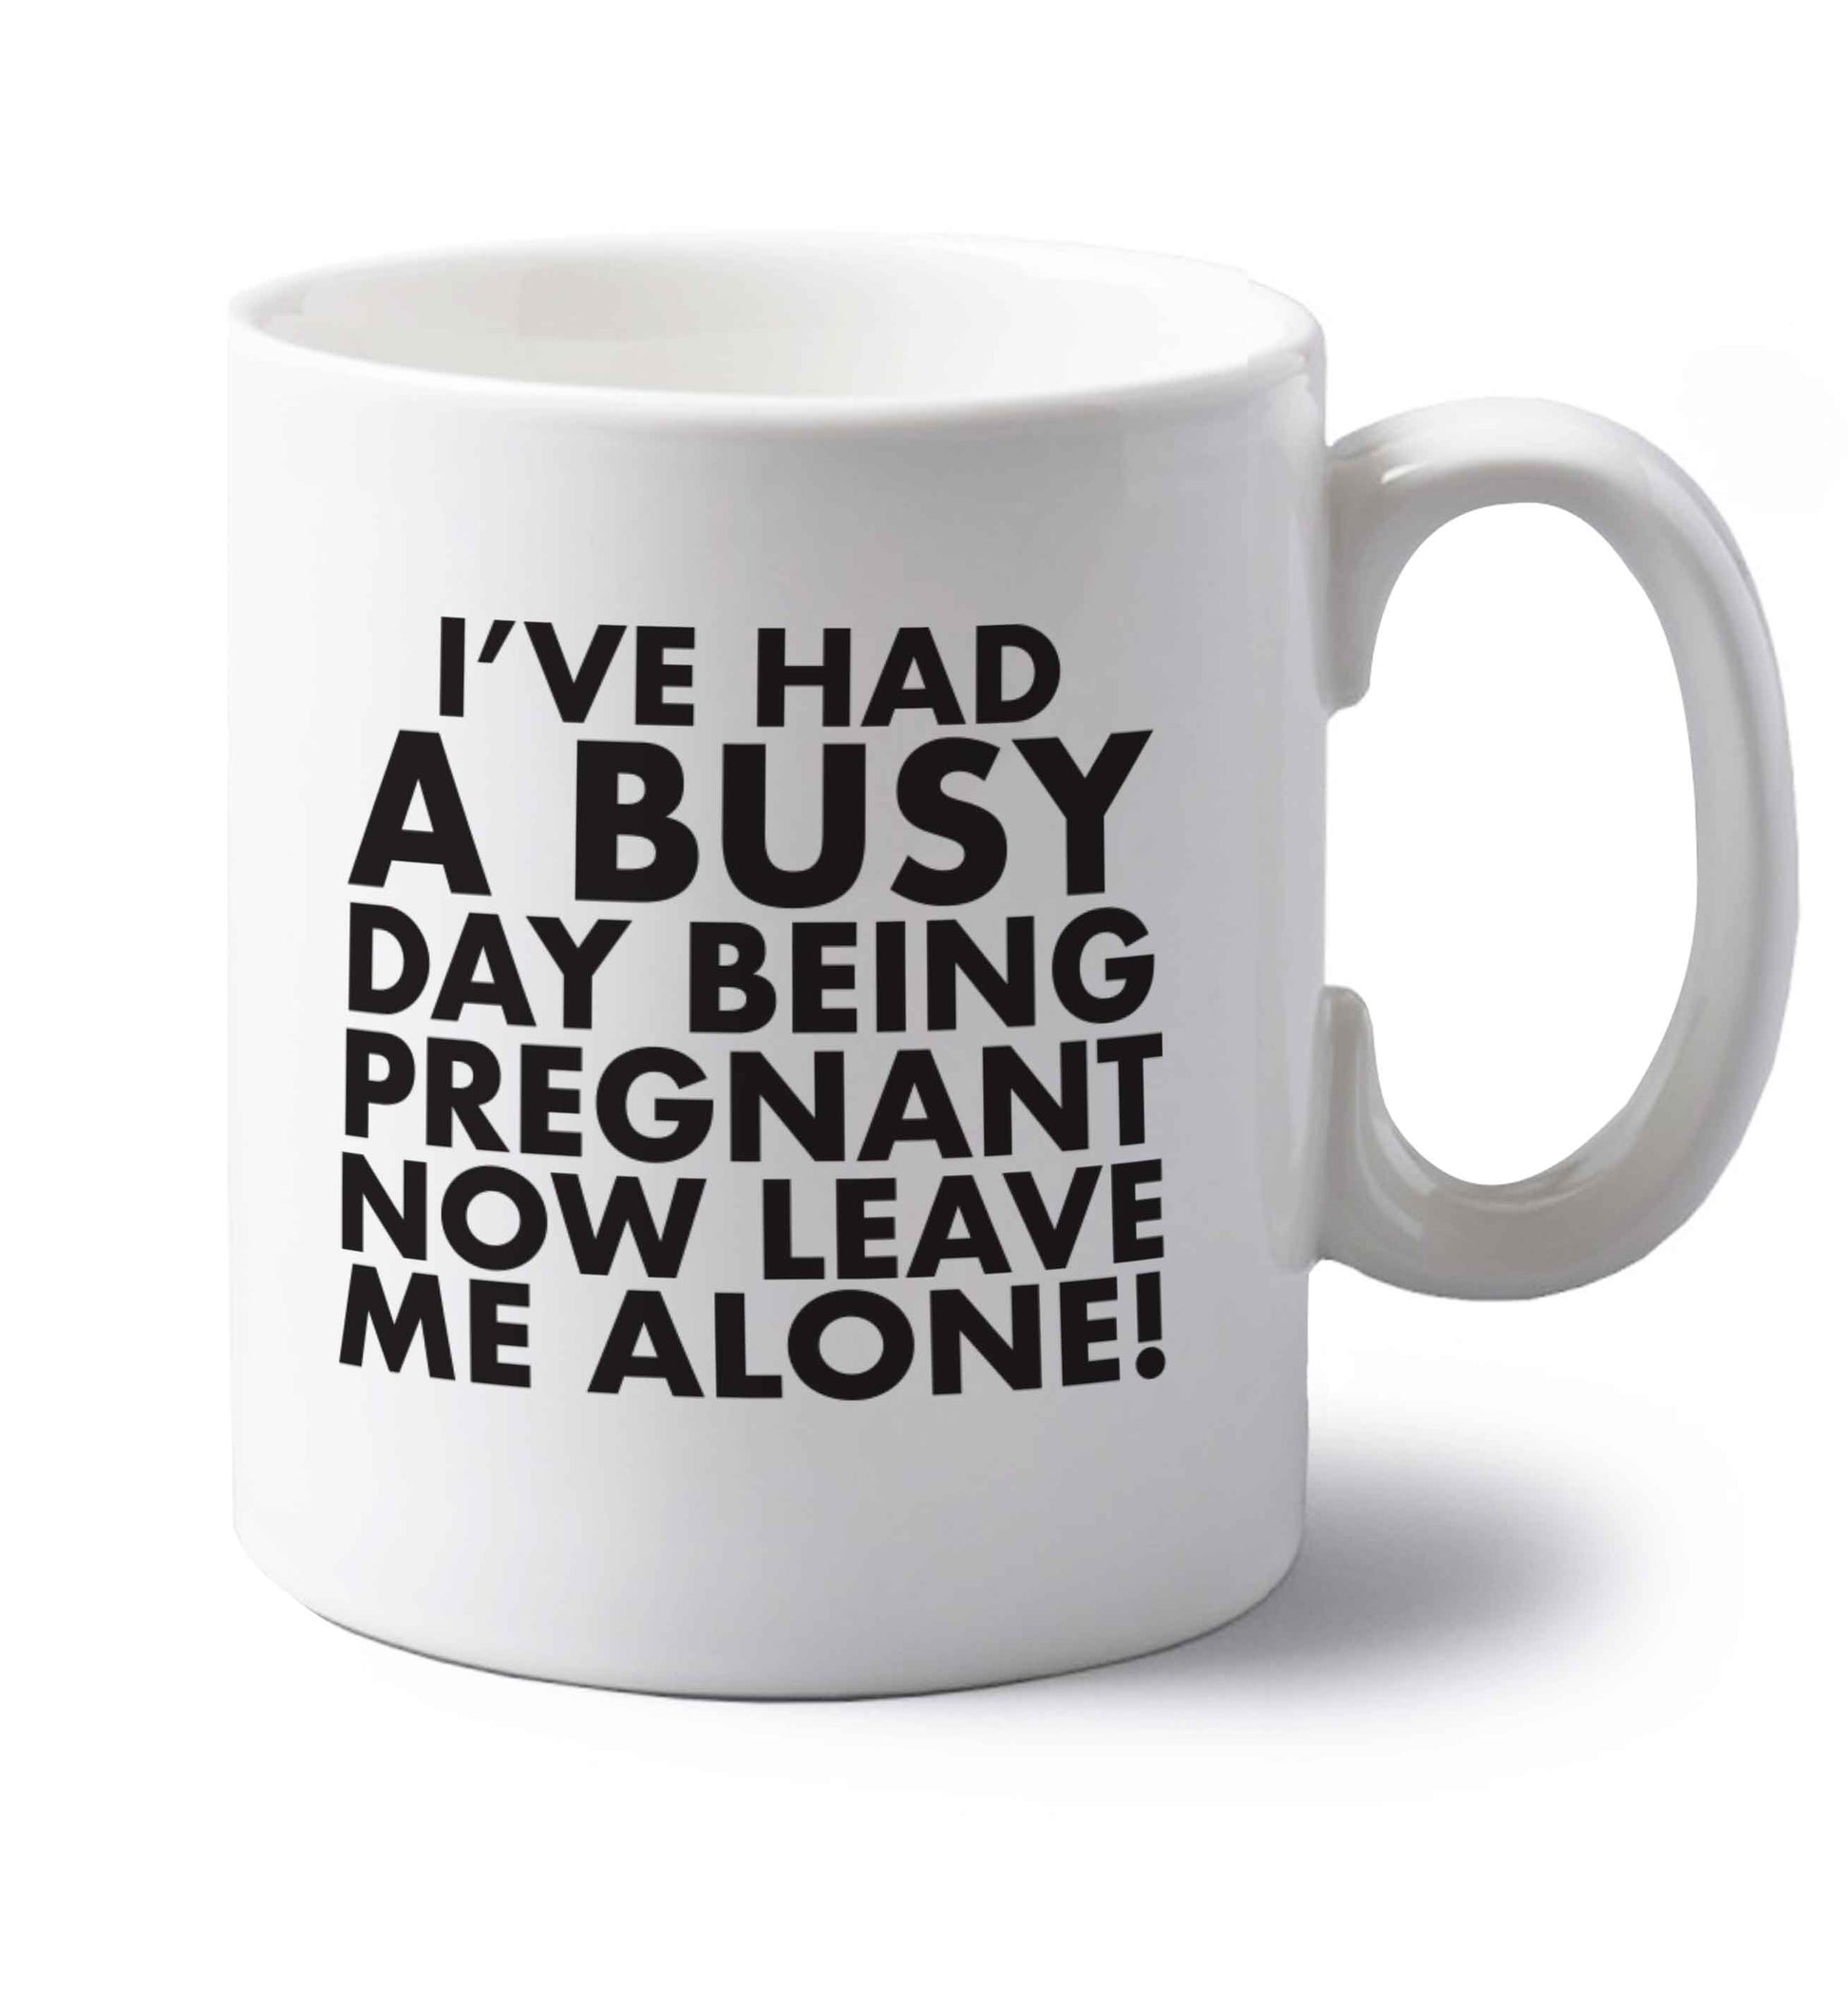 I've had a busy day being pregnant now leave me alone left handed white ceramic mug 